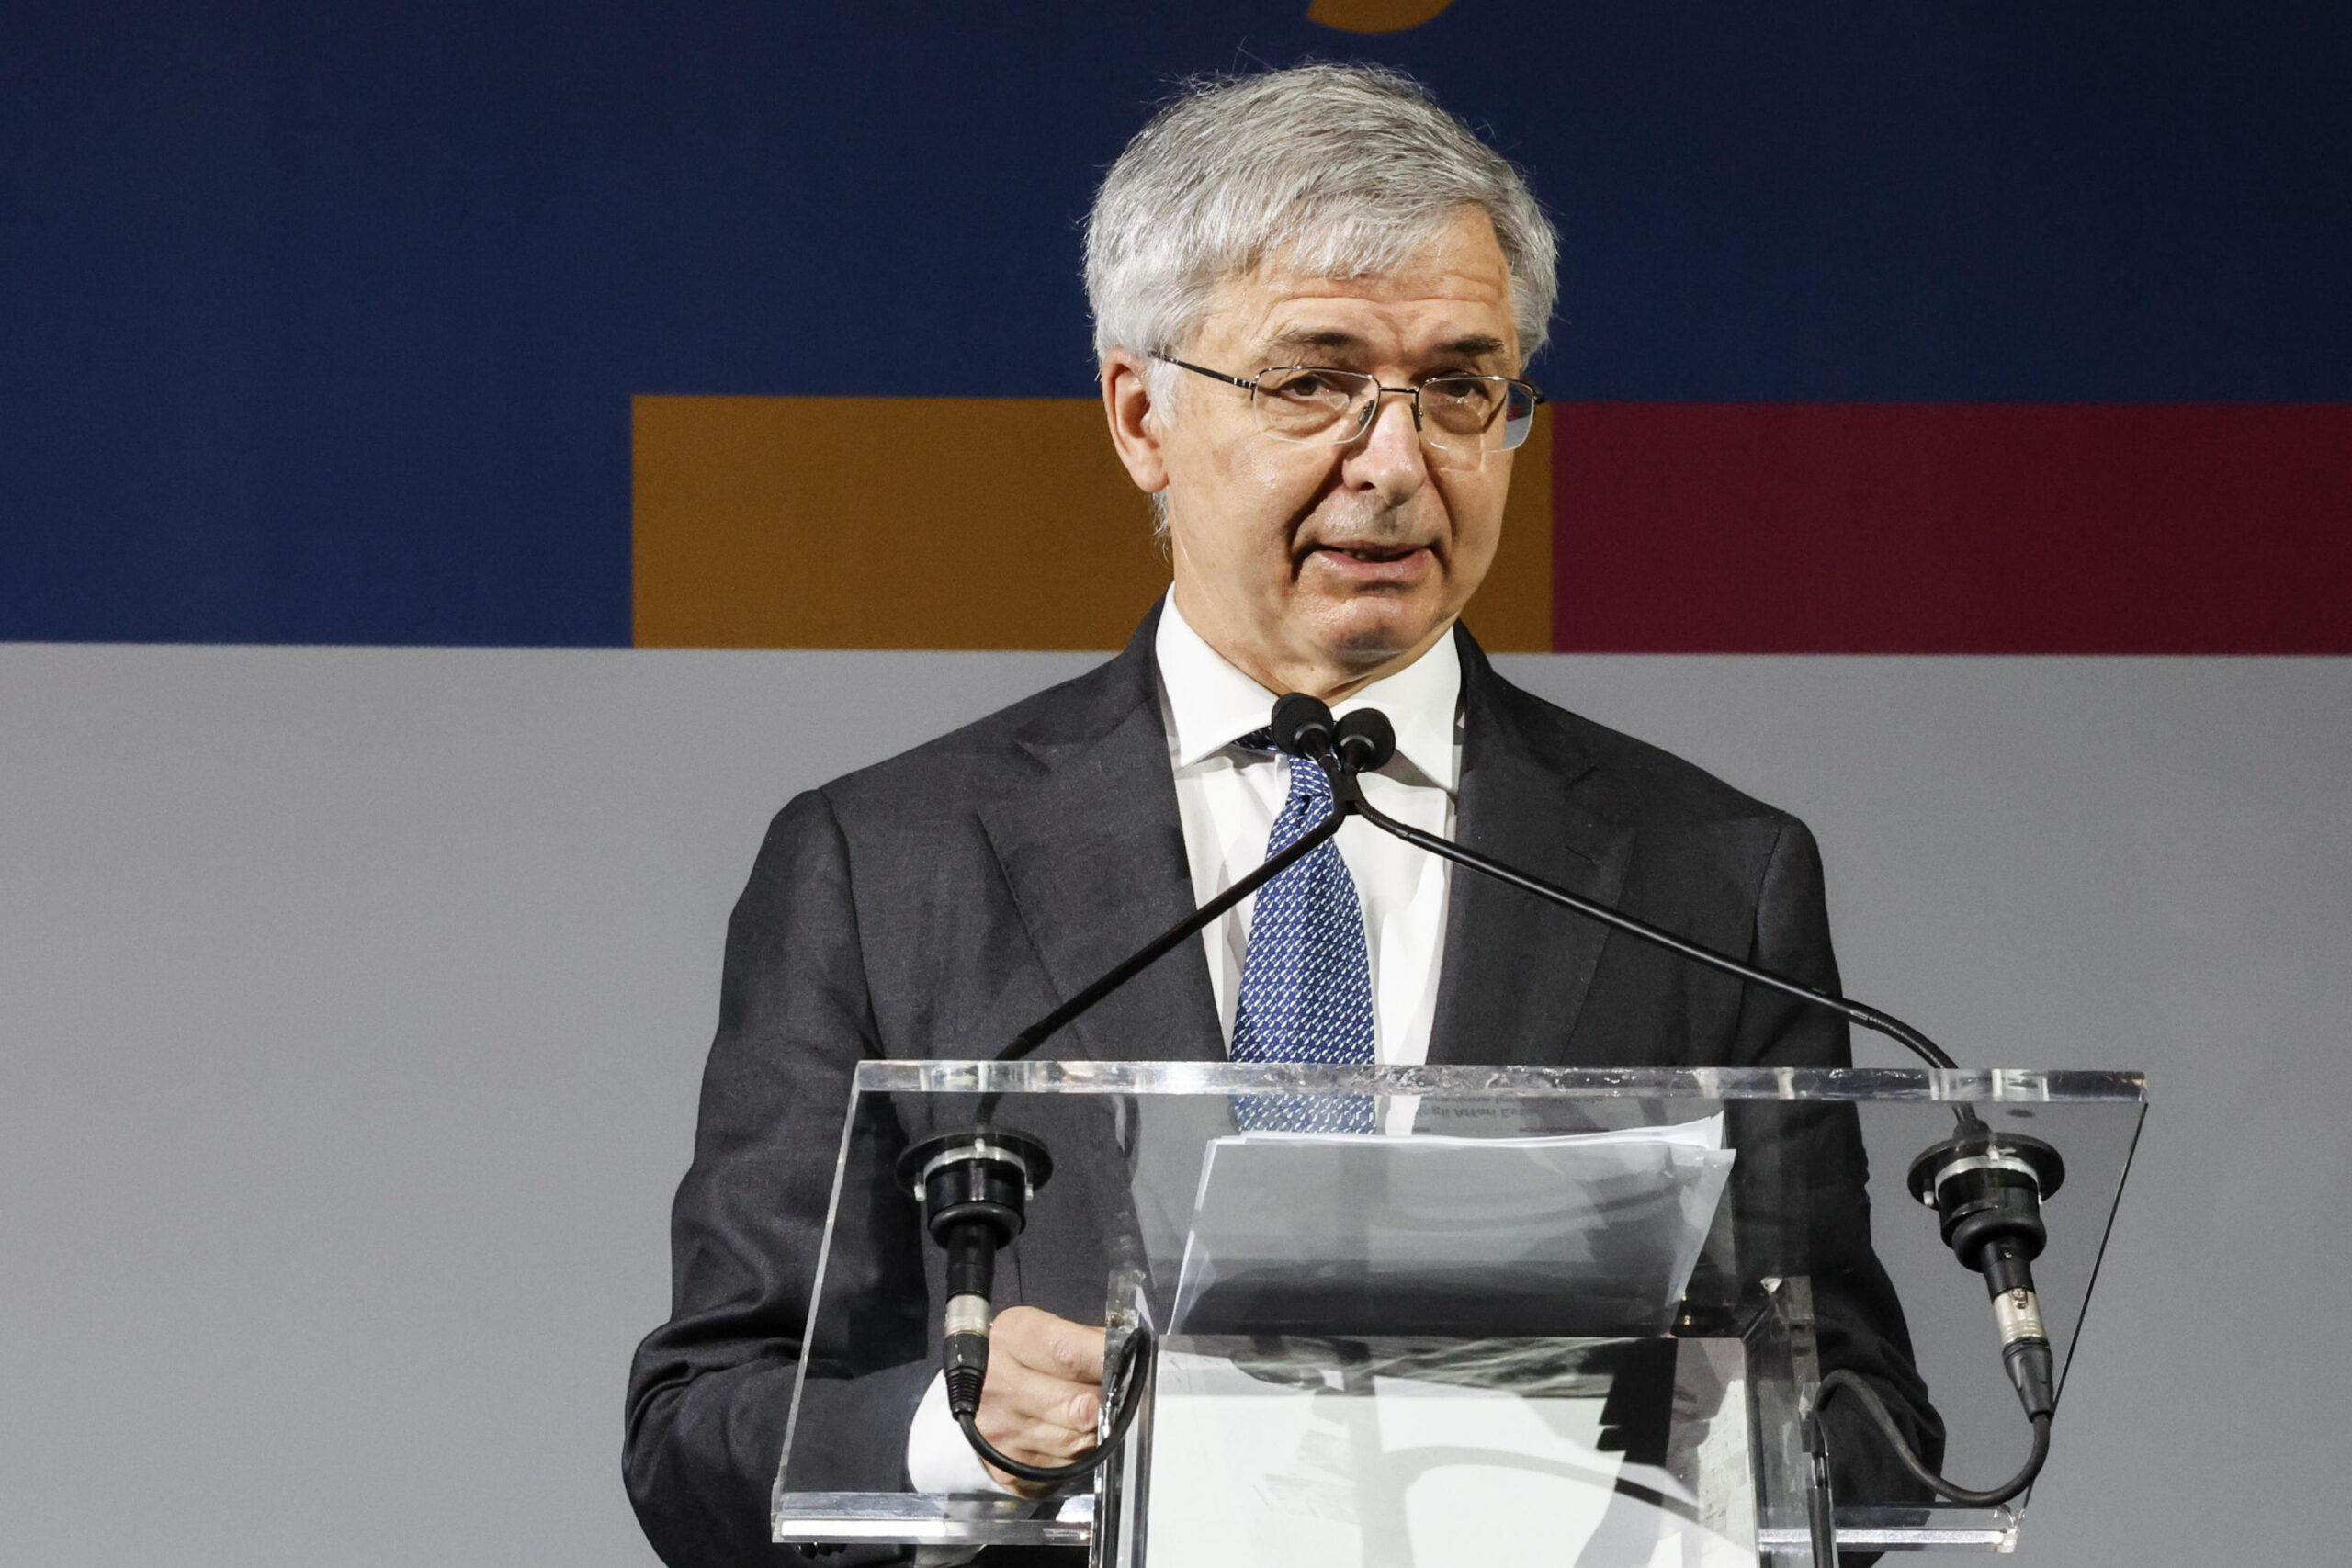 Minister of Economy and Finance, Daniele Franco during the 2nd National Conference on development cooperation ?CO-OPERA 2022?,  Rome 24 June 2022.
ANSA/FABIO FRUSTACI